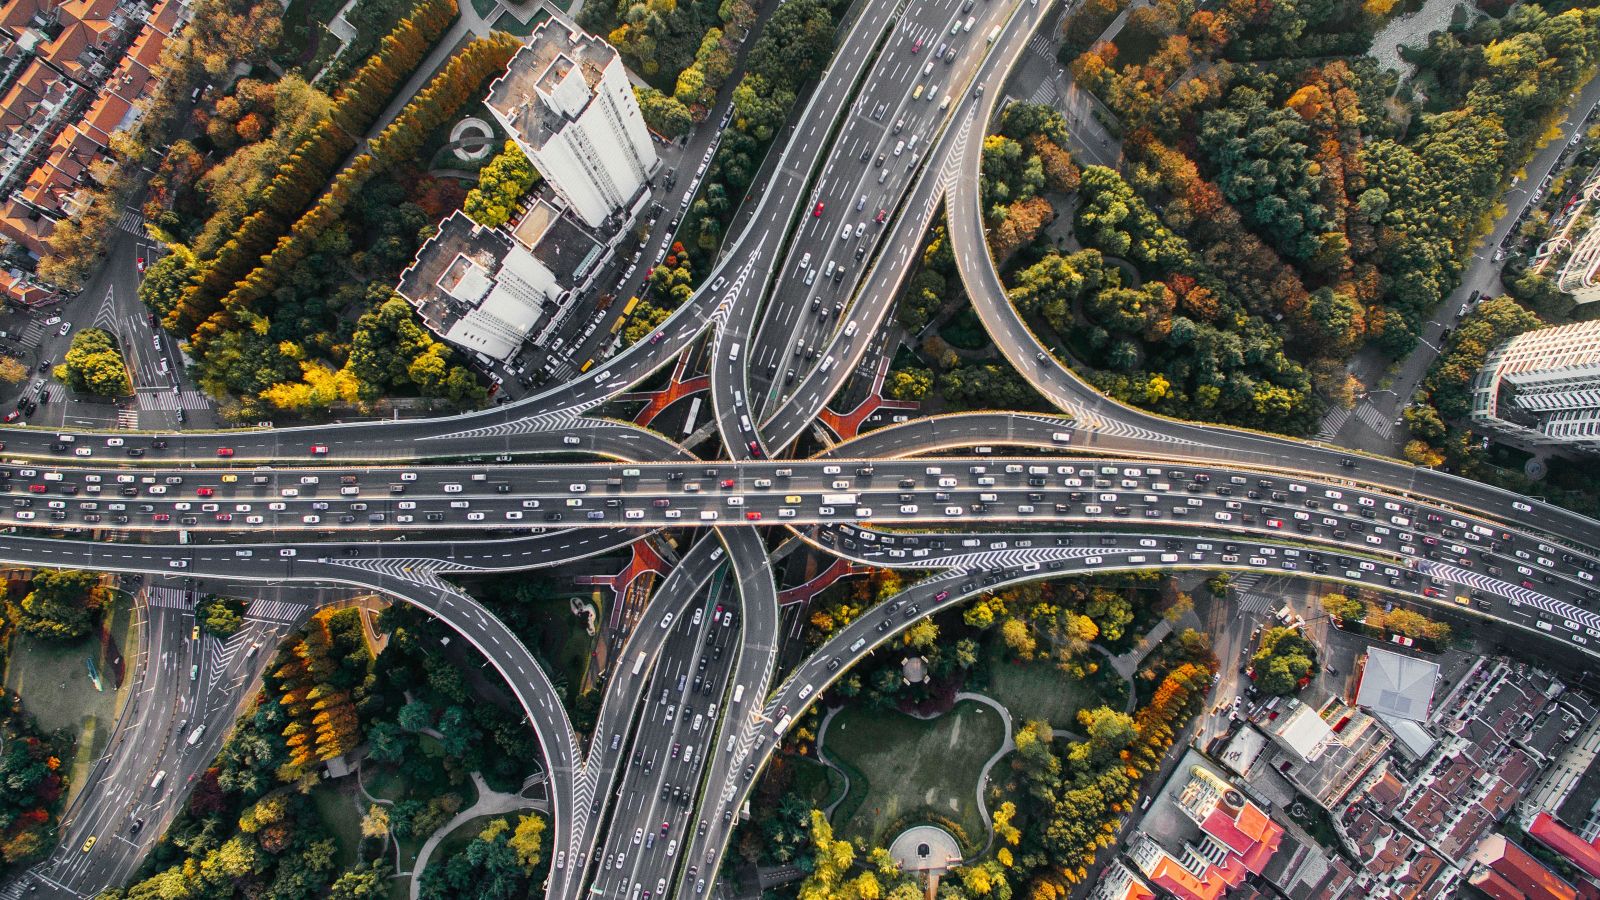 An aerial view of intersecting highways within a city.